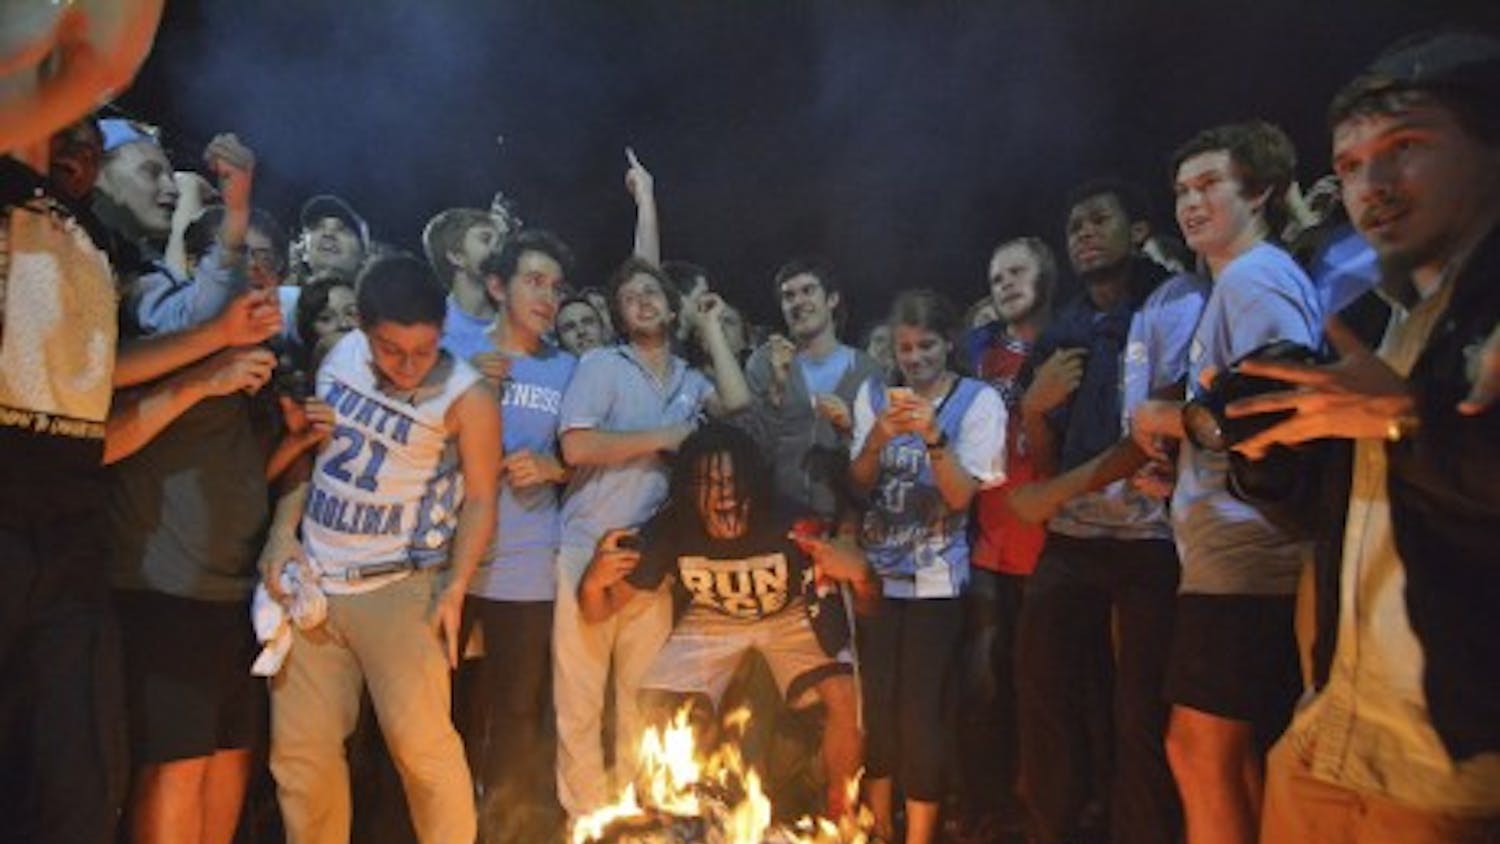 Excited fans jump over a bonfire on Franklin Street after North Carolina beat Duke in men’s basketball two years ago.